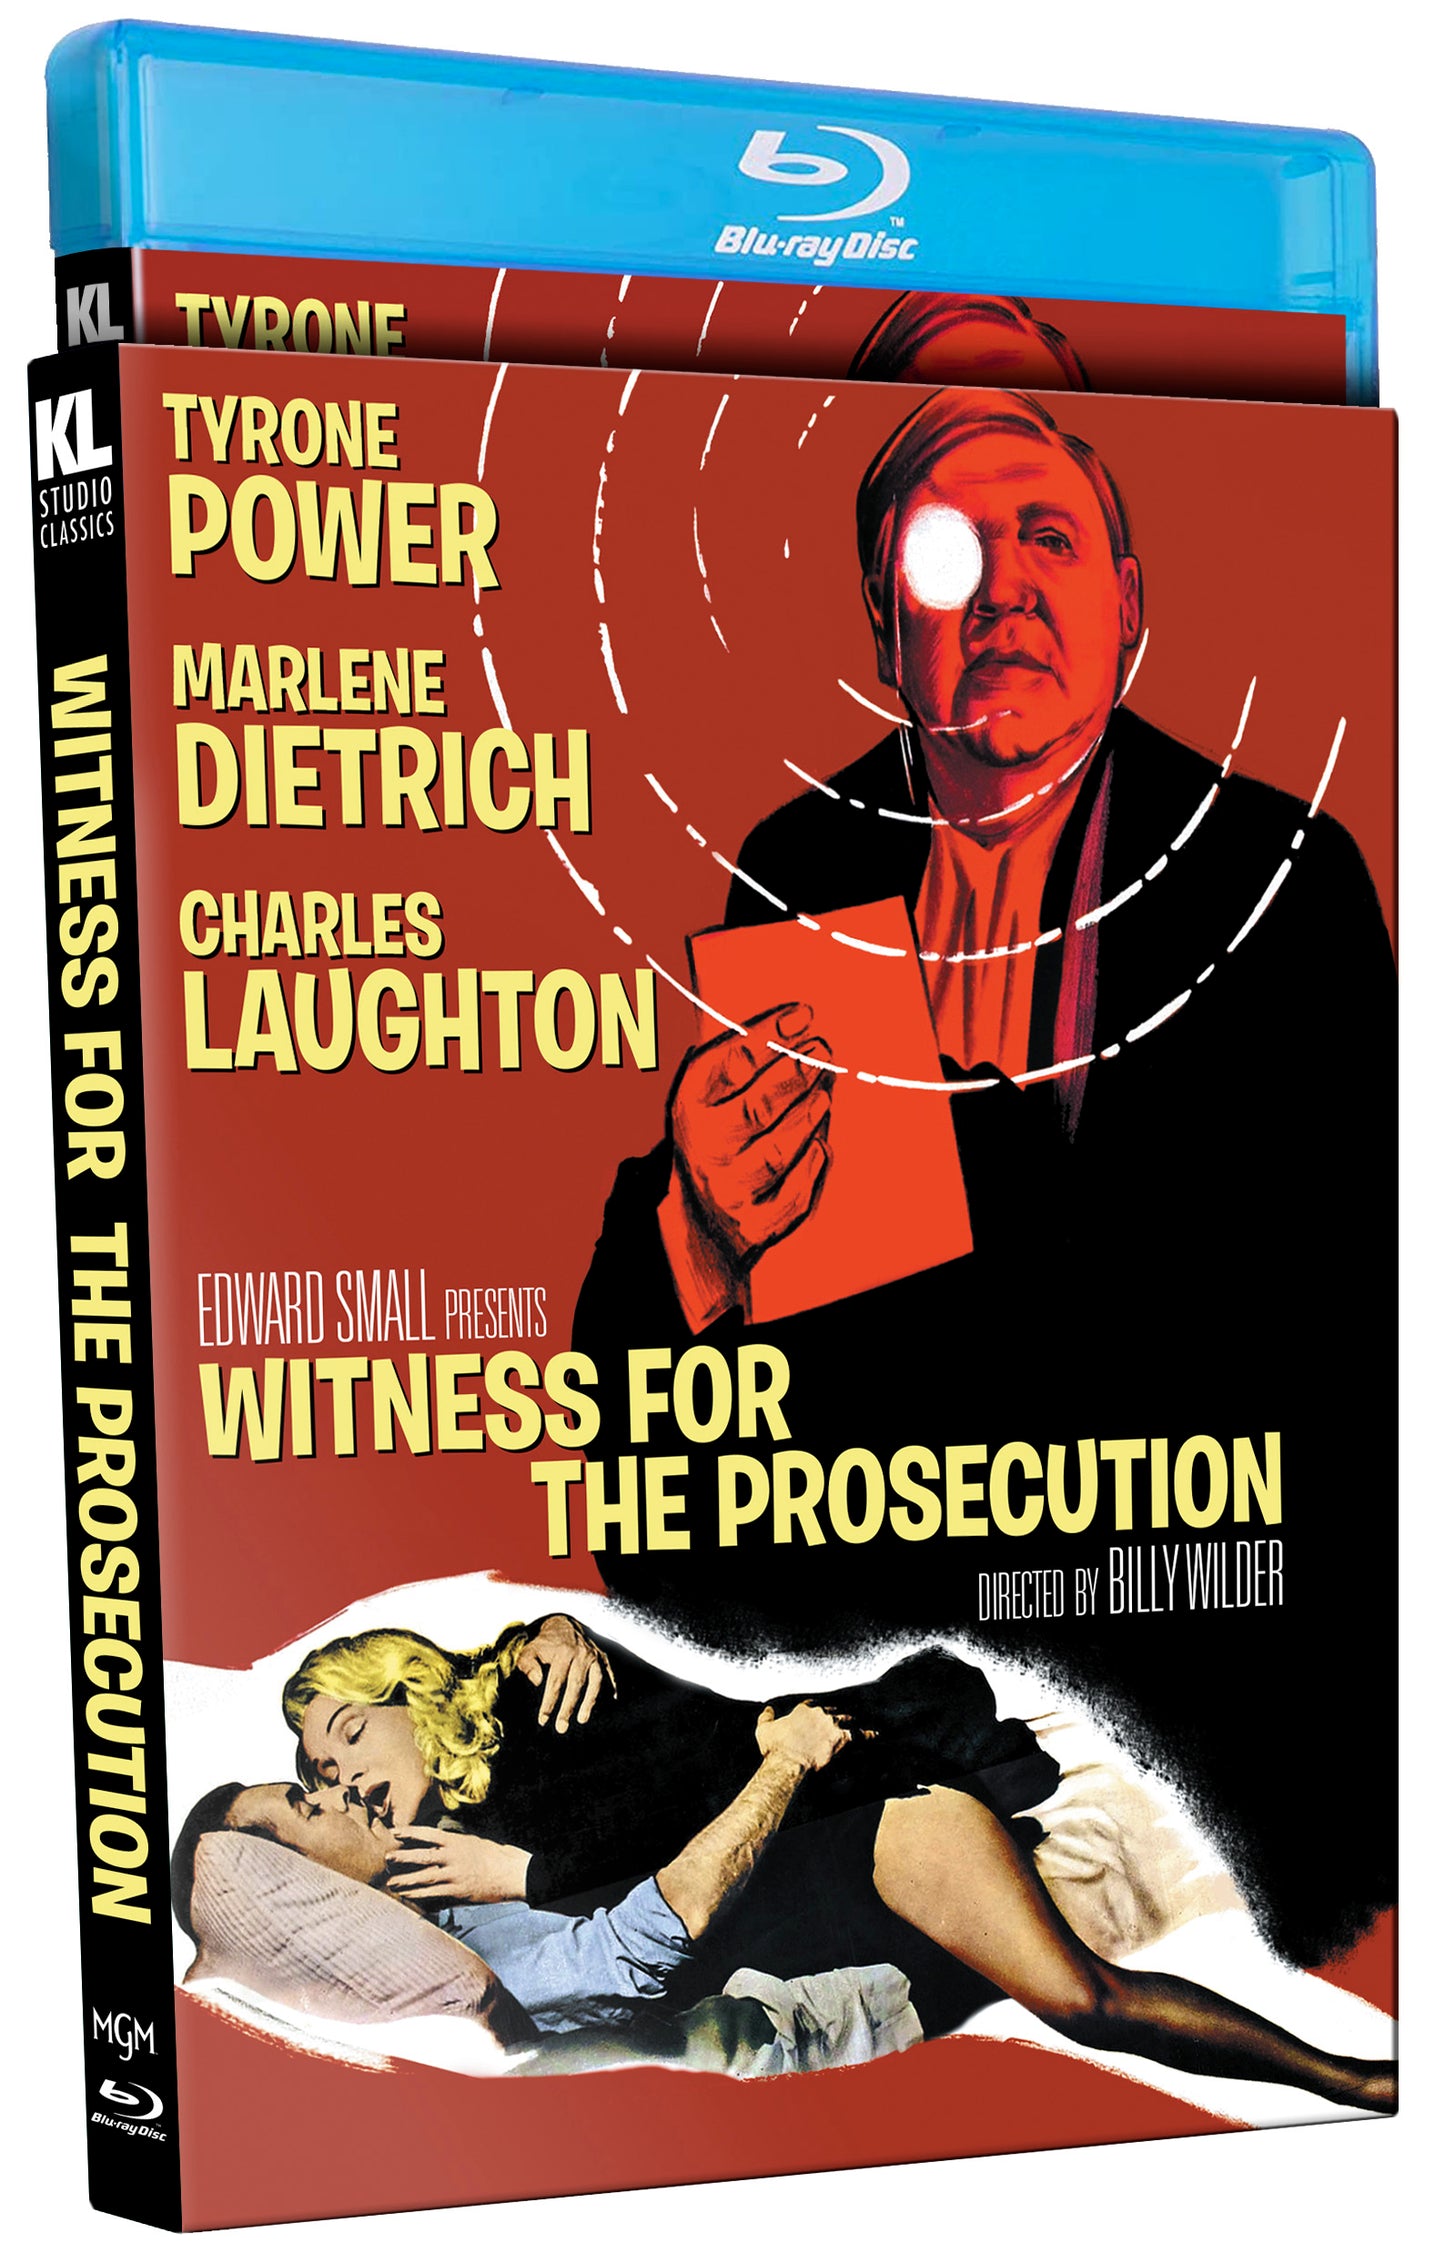 Witness for the Prosection Blu-ray Special Edition with Slipcover (Kino Lorber)